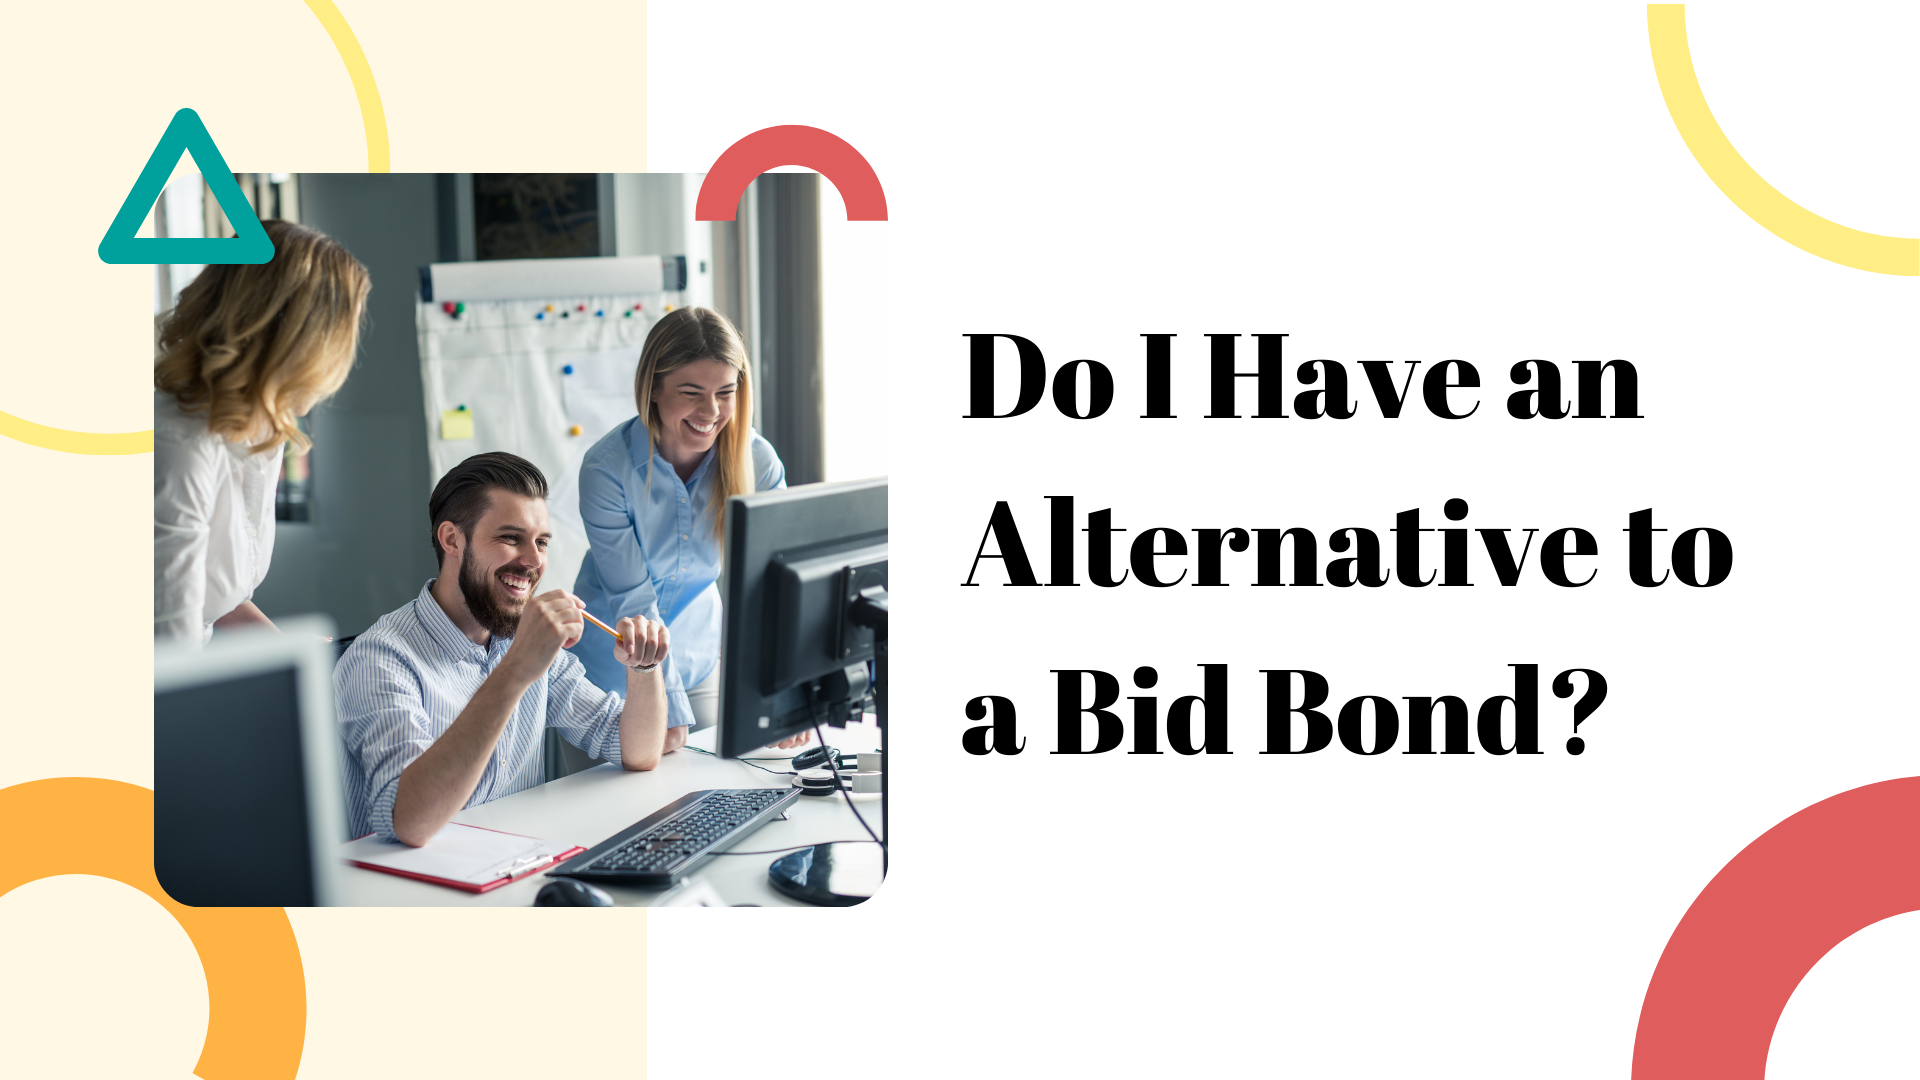 bid bond - When do you need to put in a bid for a construction or engineering project - employees